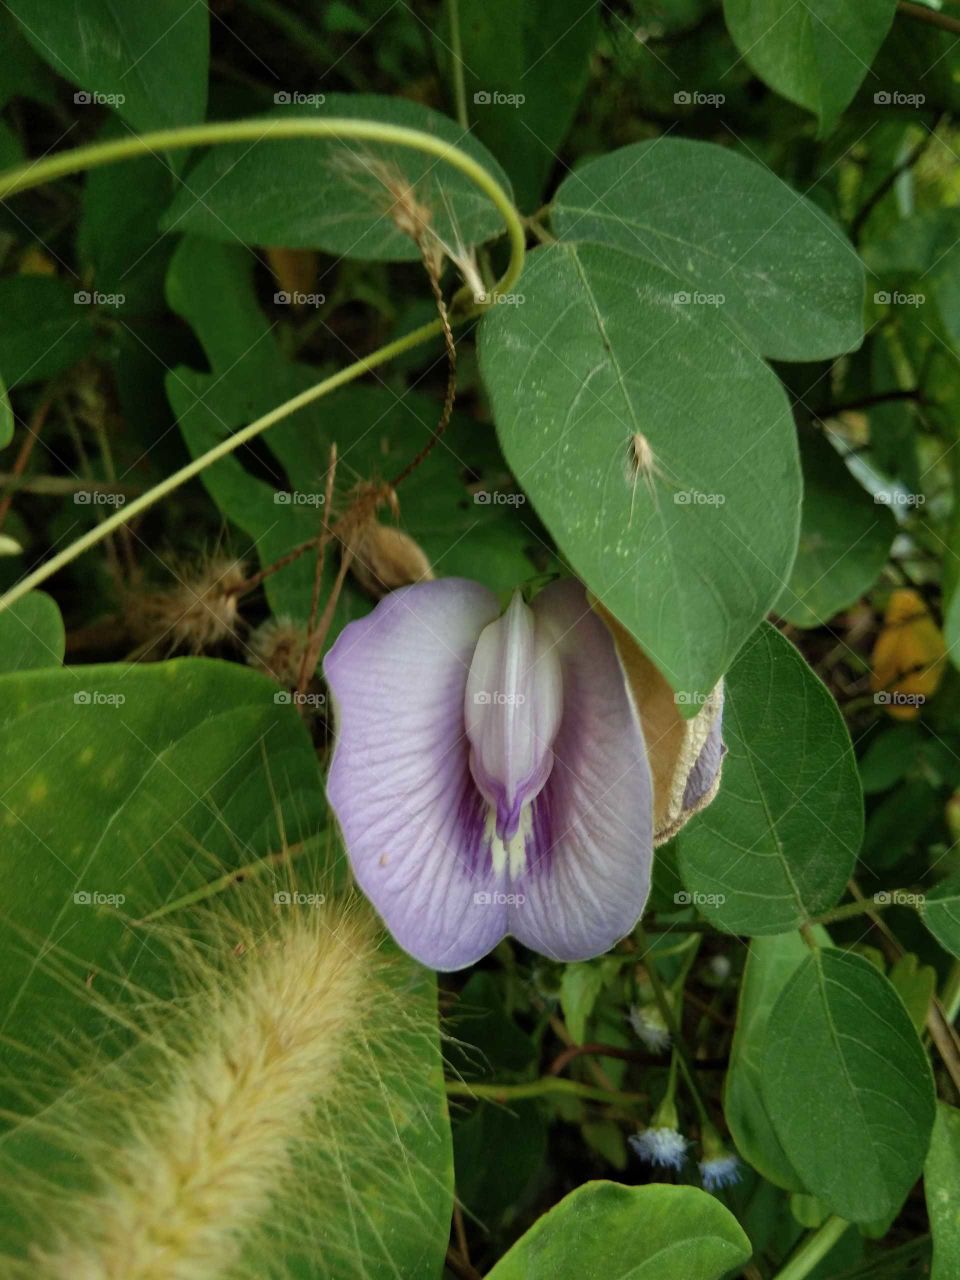 Clitoria Ternatea / purple pea / telang flower; herbal plants anghota tropical peas, vines commonly found in the yard or the edge of the forest. Benefits of flowers can be made tea and body health medicine. (south borneo)